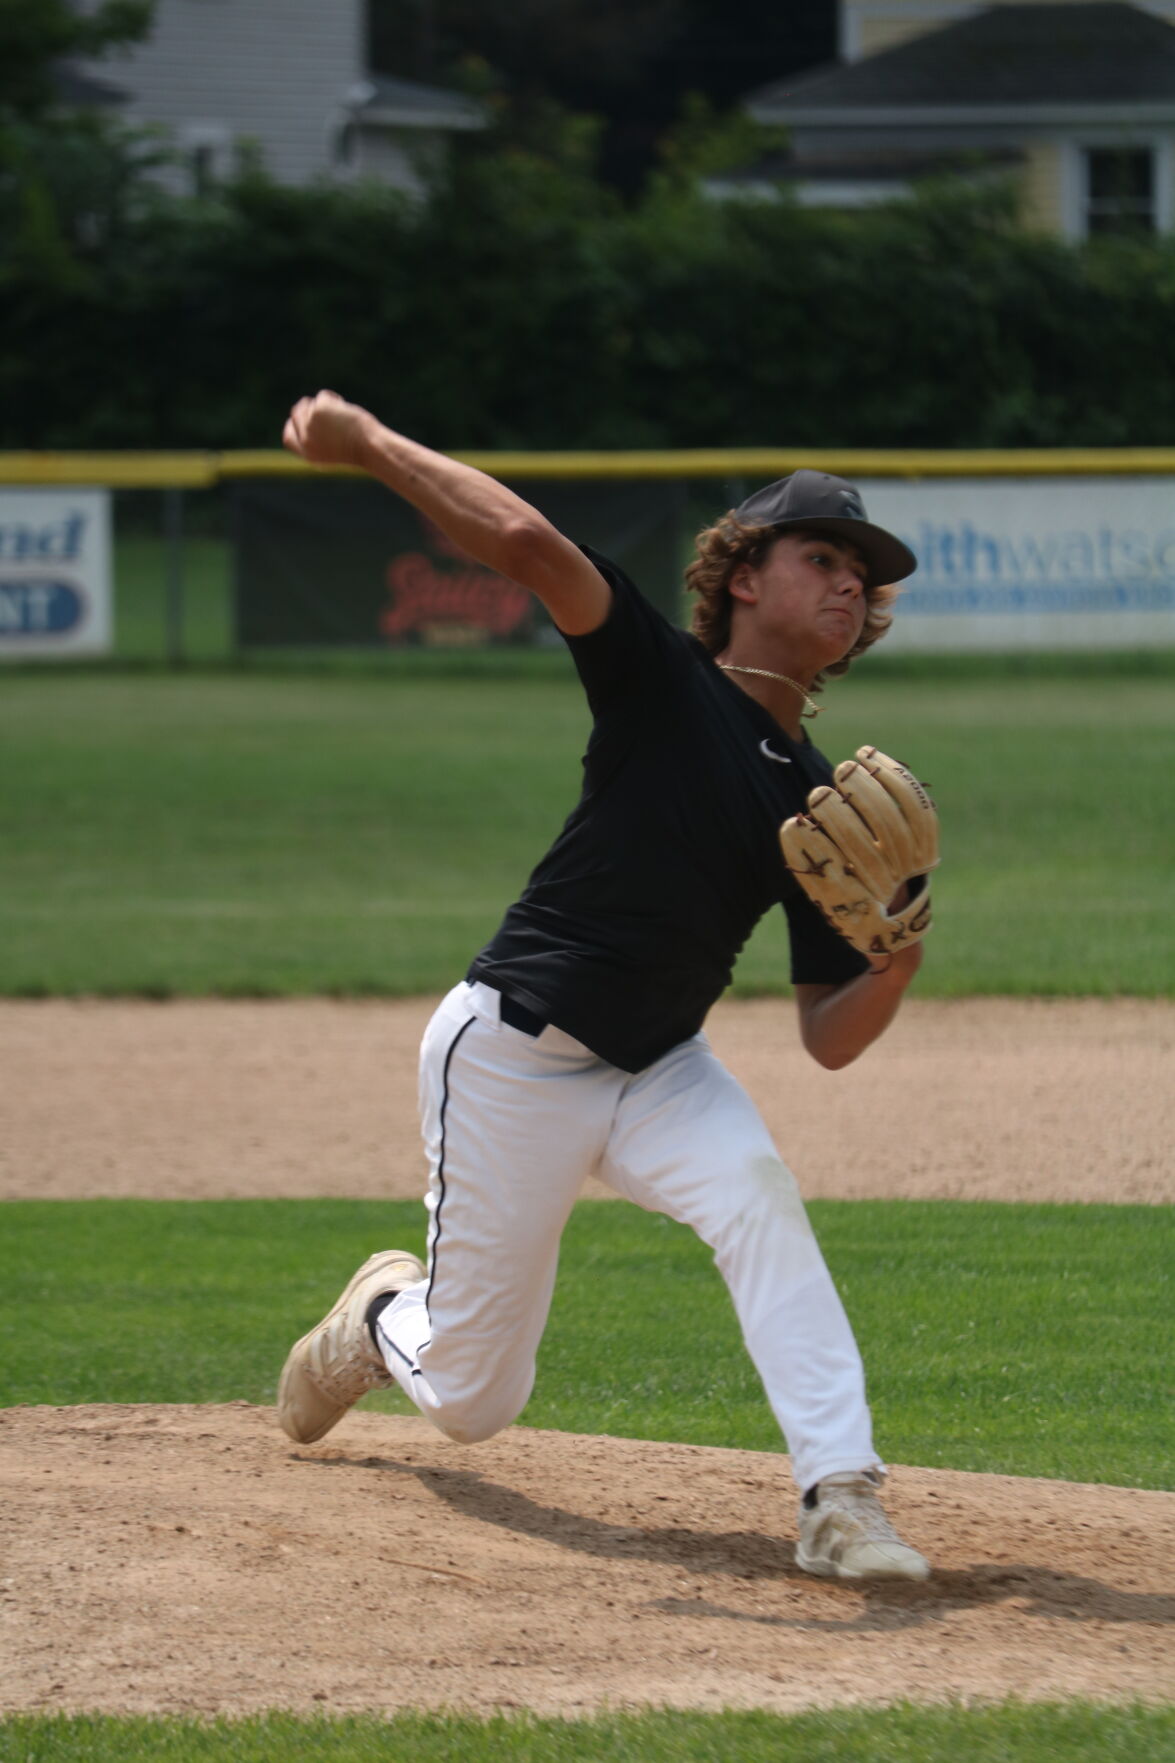 Trumbull 15s wins New England Babe Ruth title